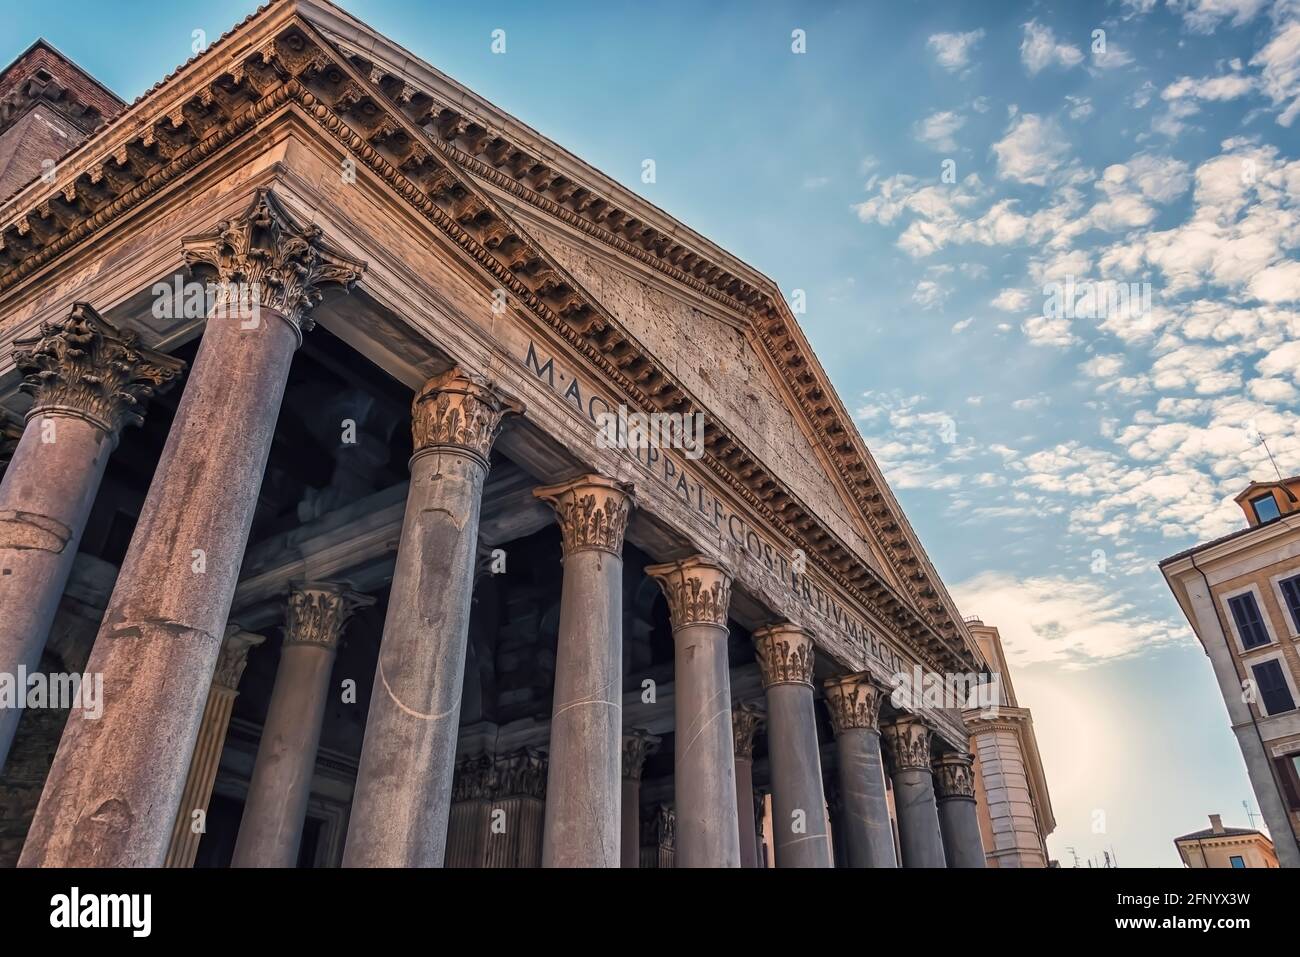 Facade of the famous monument in Rome: the Pantheon Stock Photo